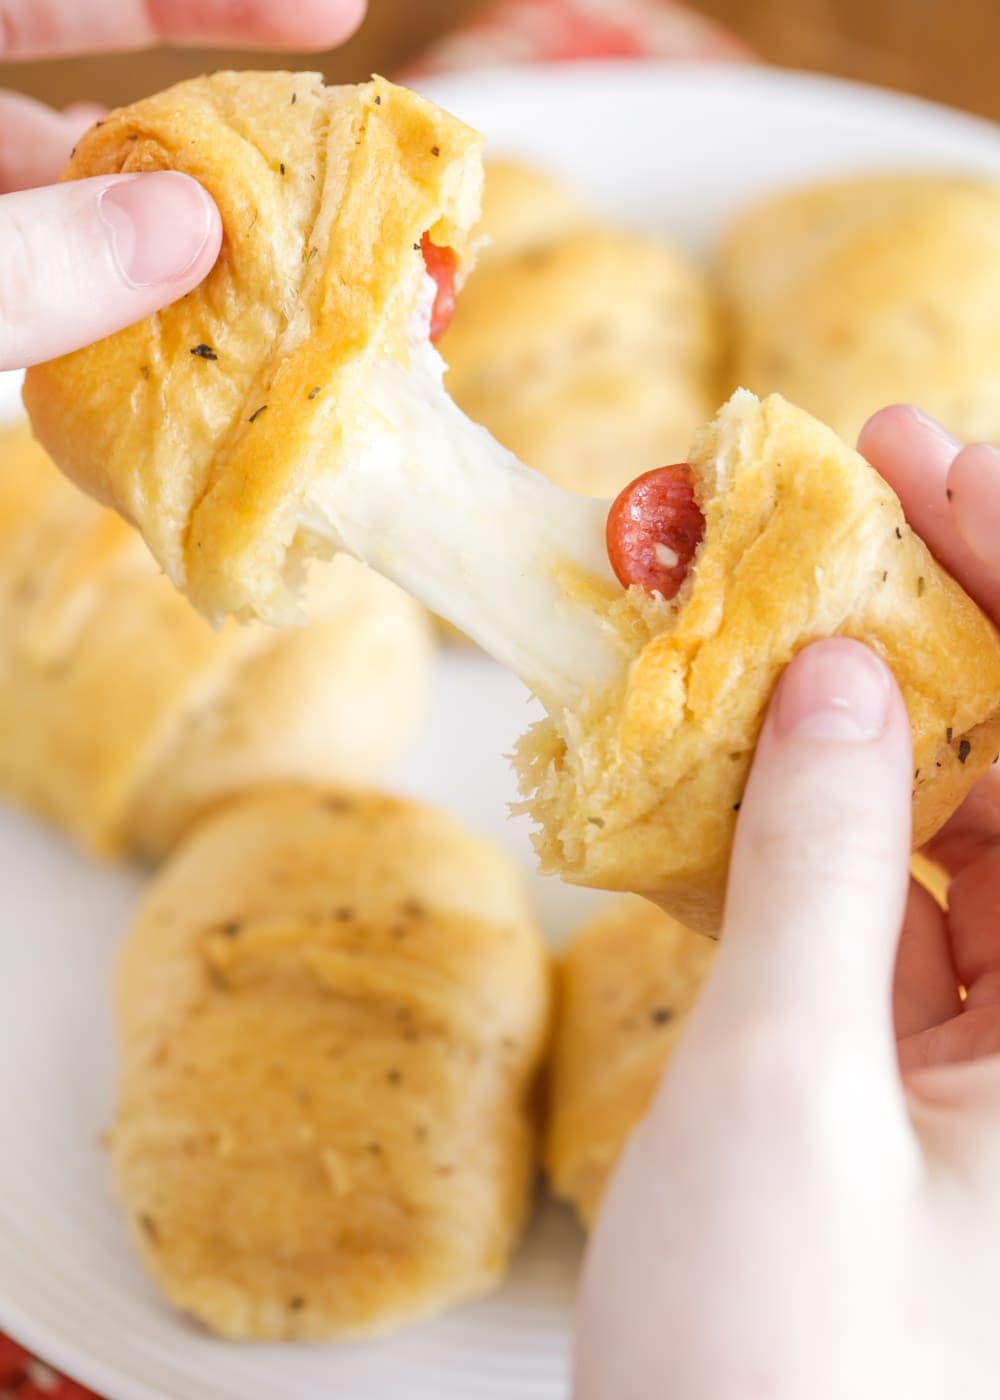 Breaking apart a crescent roll pizza roll up